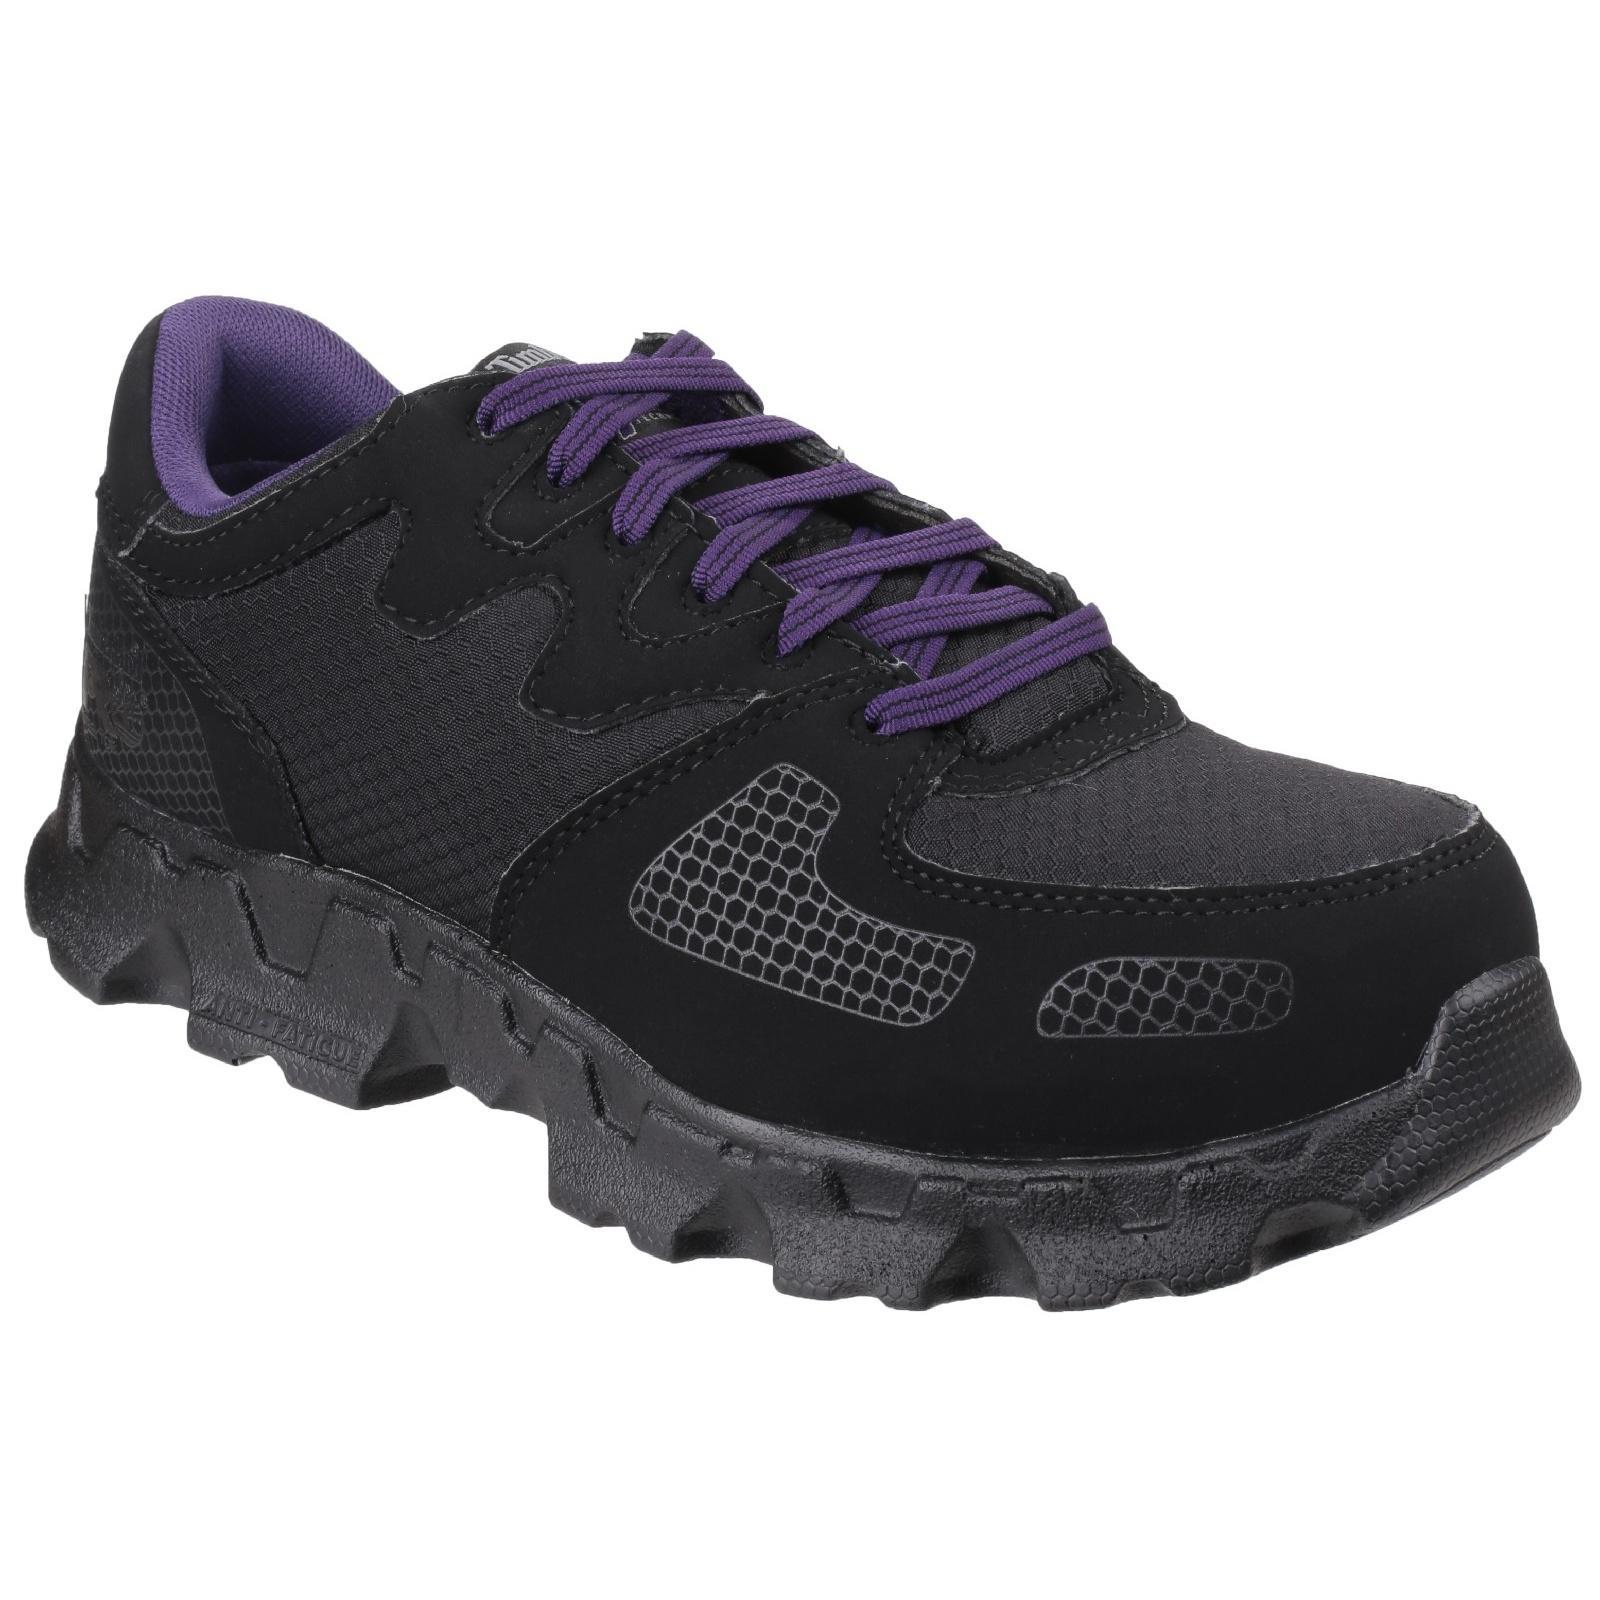 Timberland Pro Womens/Ladies Powertrain Low Lace Up Safety Shoes (Black) (6.5 UK)